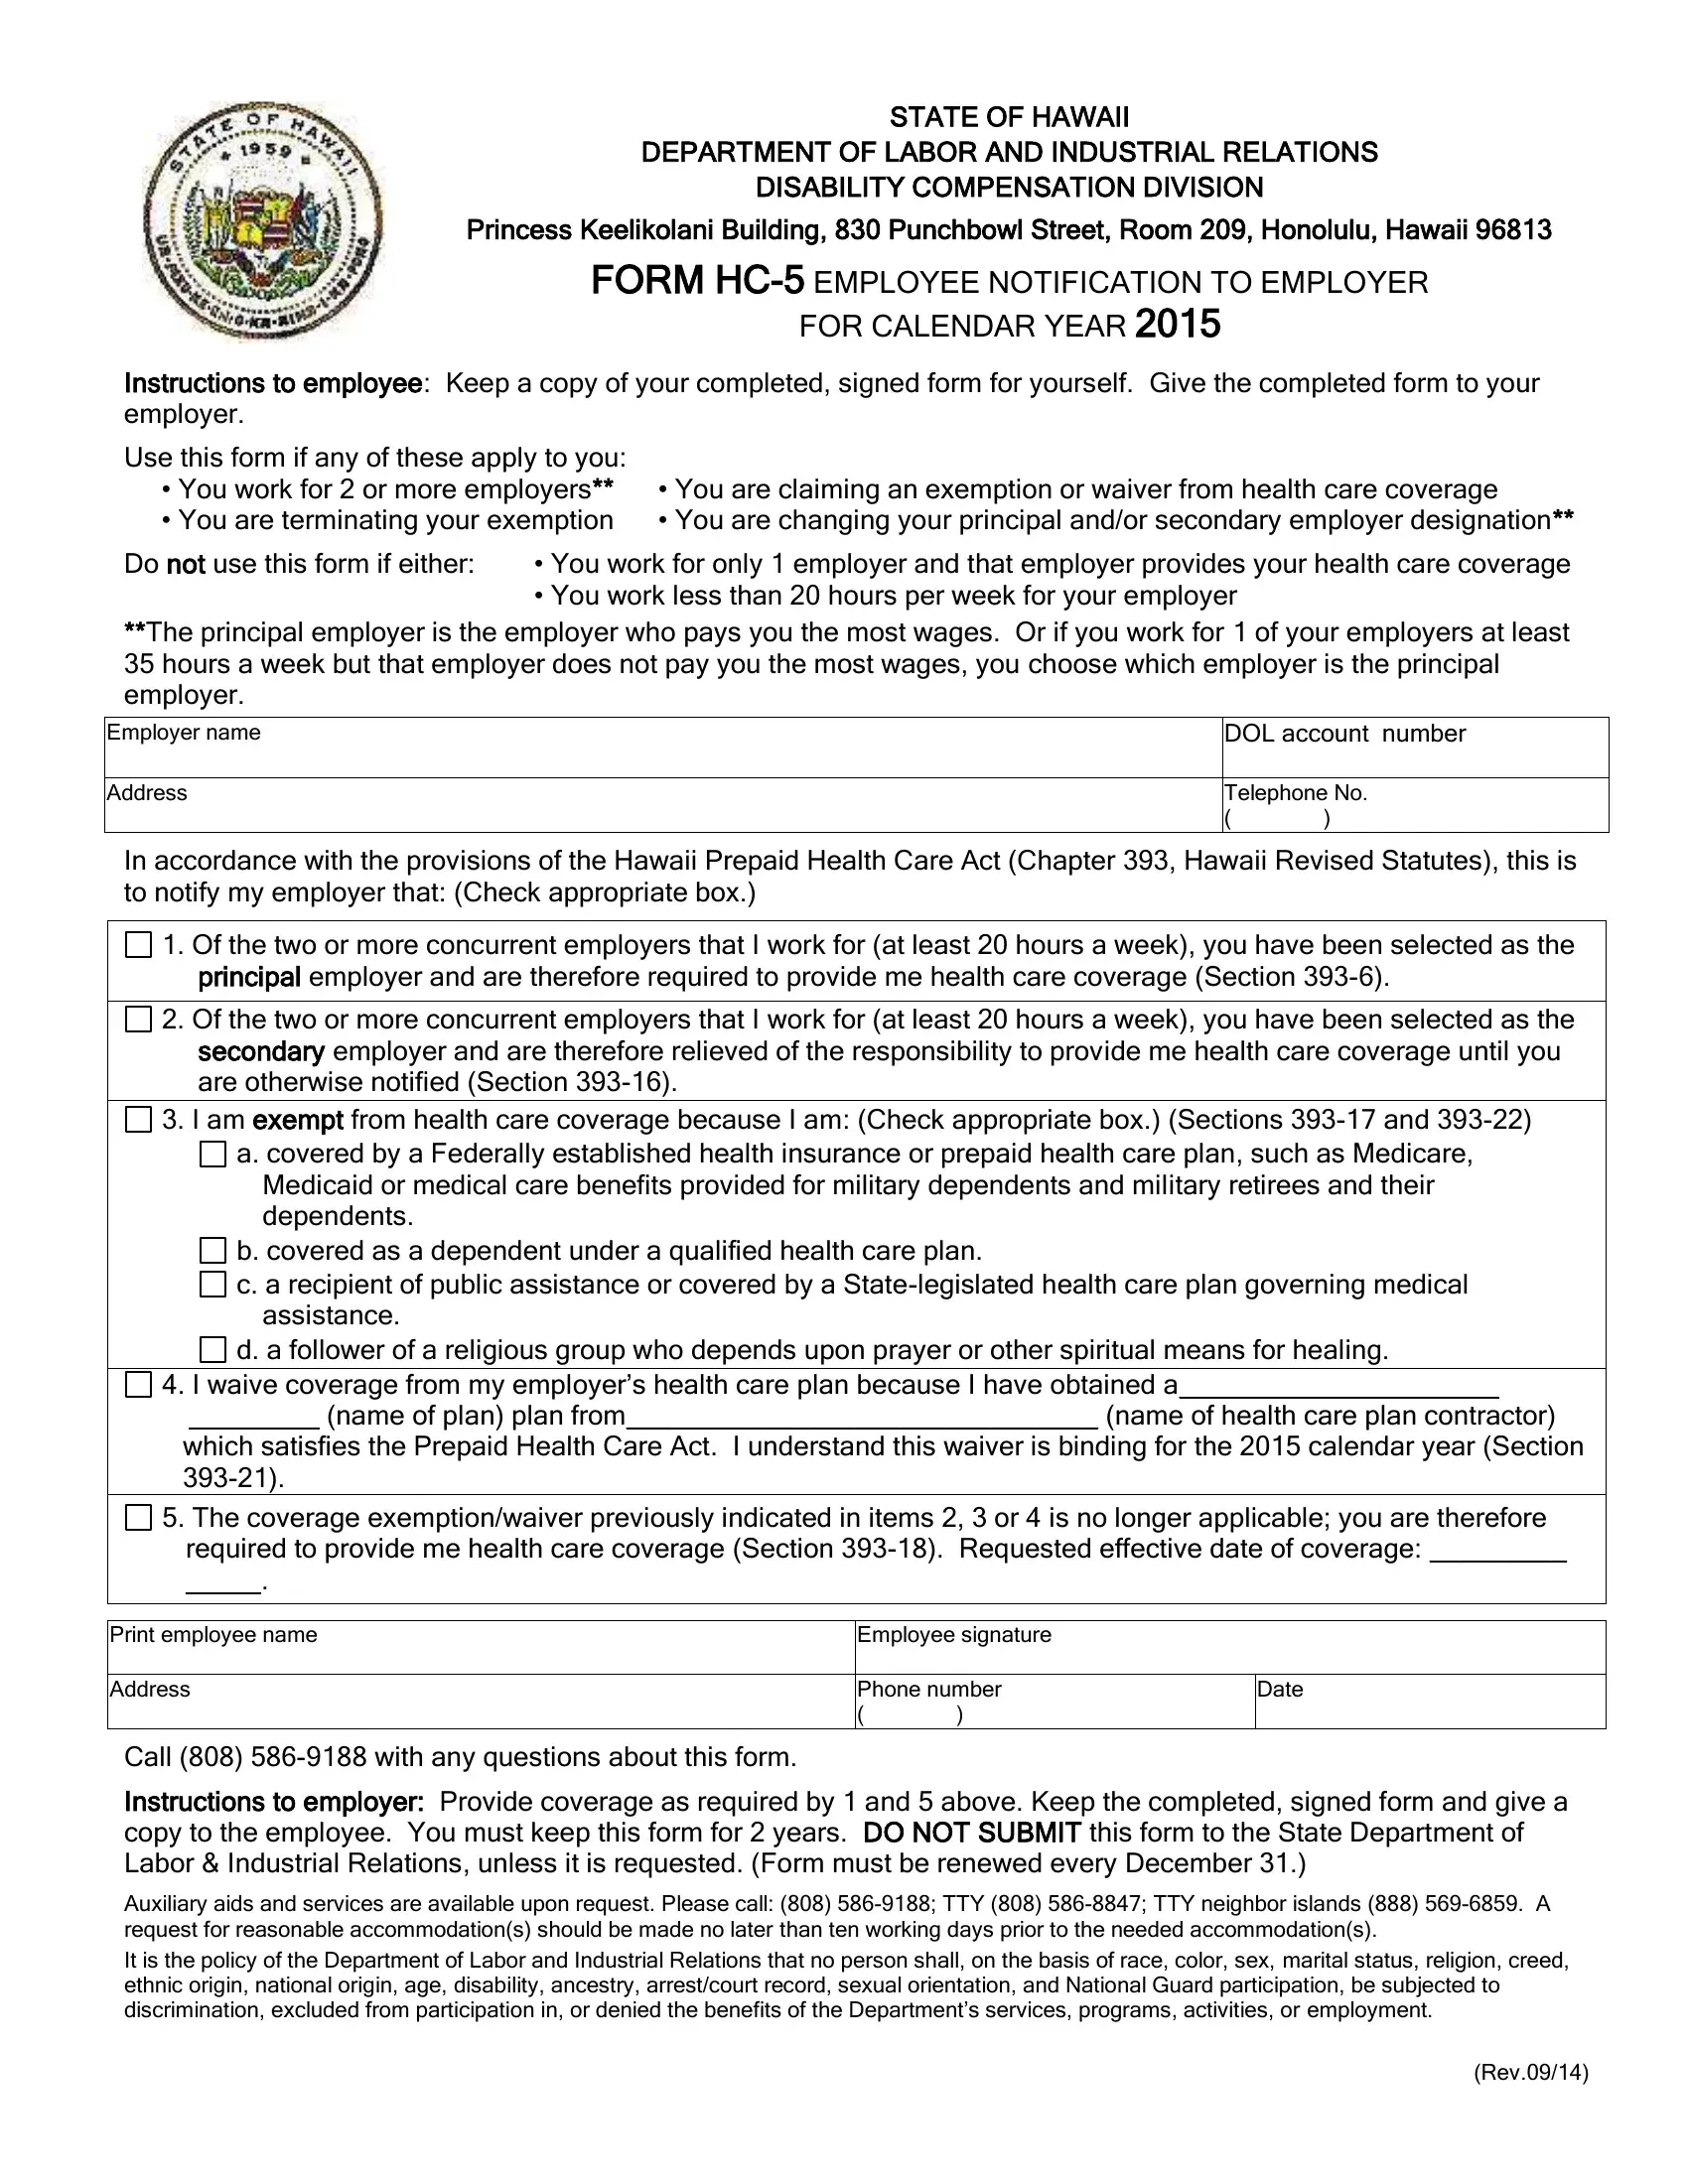 hawaii-form-hc-5-fill-out-printable-pdf-forms-online